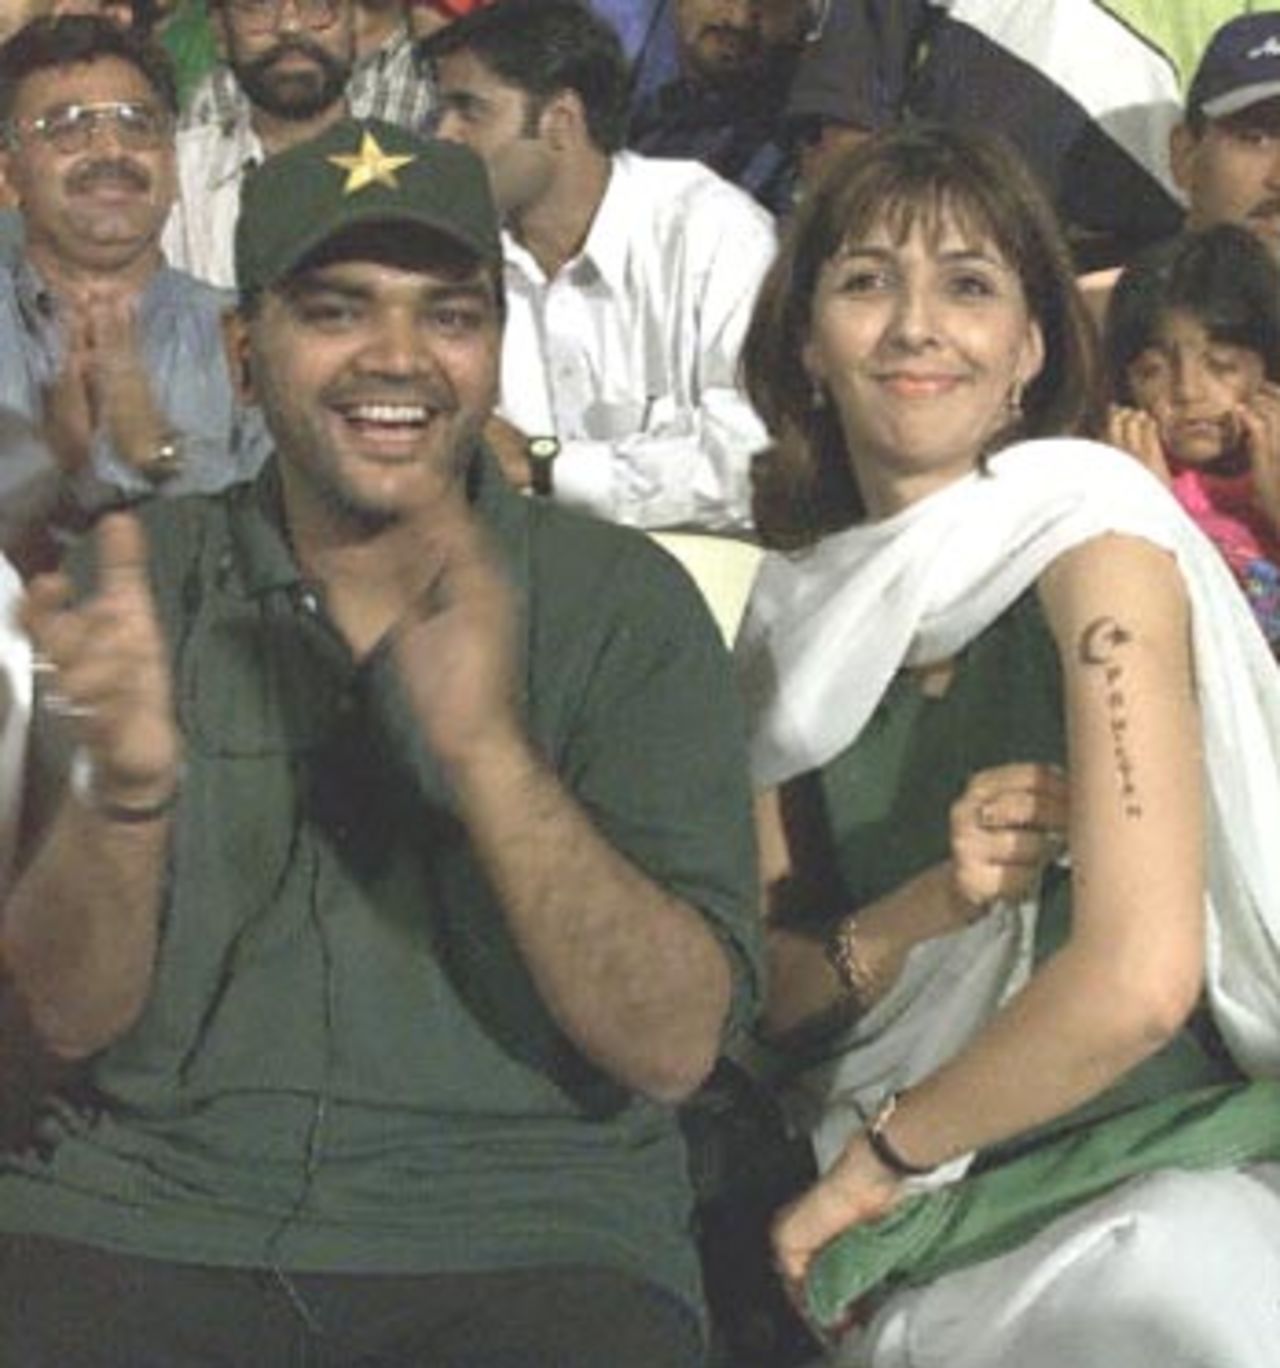 Pakistan cricket team supporter Kishver Niazi (R) shows a temporary tattoo of the Pakistani flag emblem during the final between Pakistan and South Africa in Sharjah.